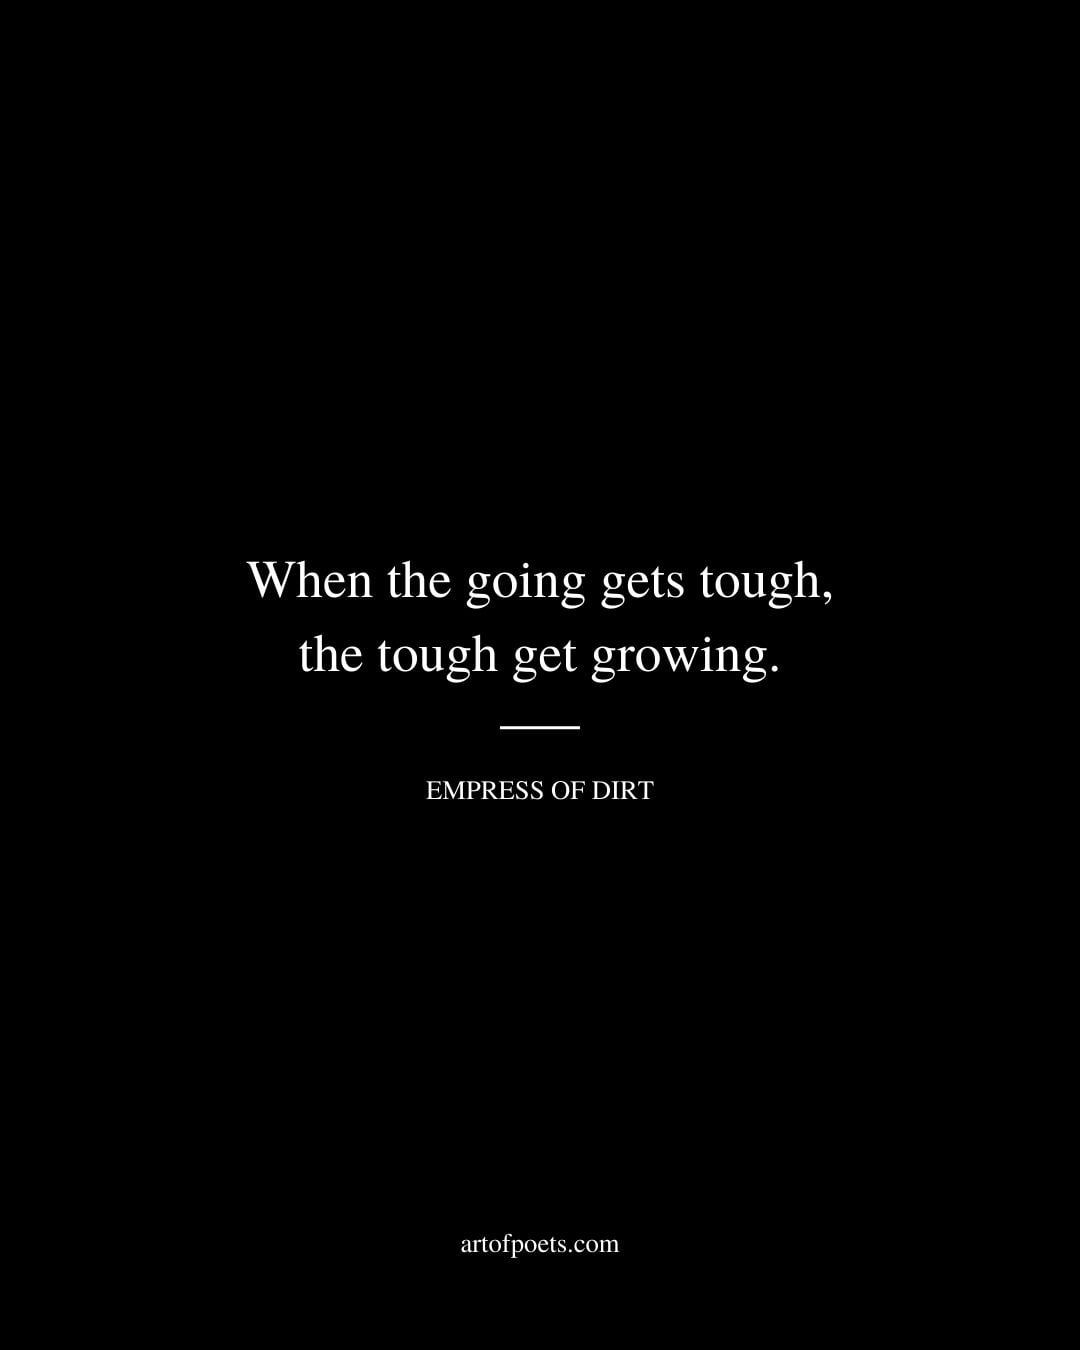 When the going gets tough the tough get growing. Empress of Dirt